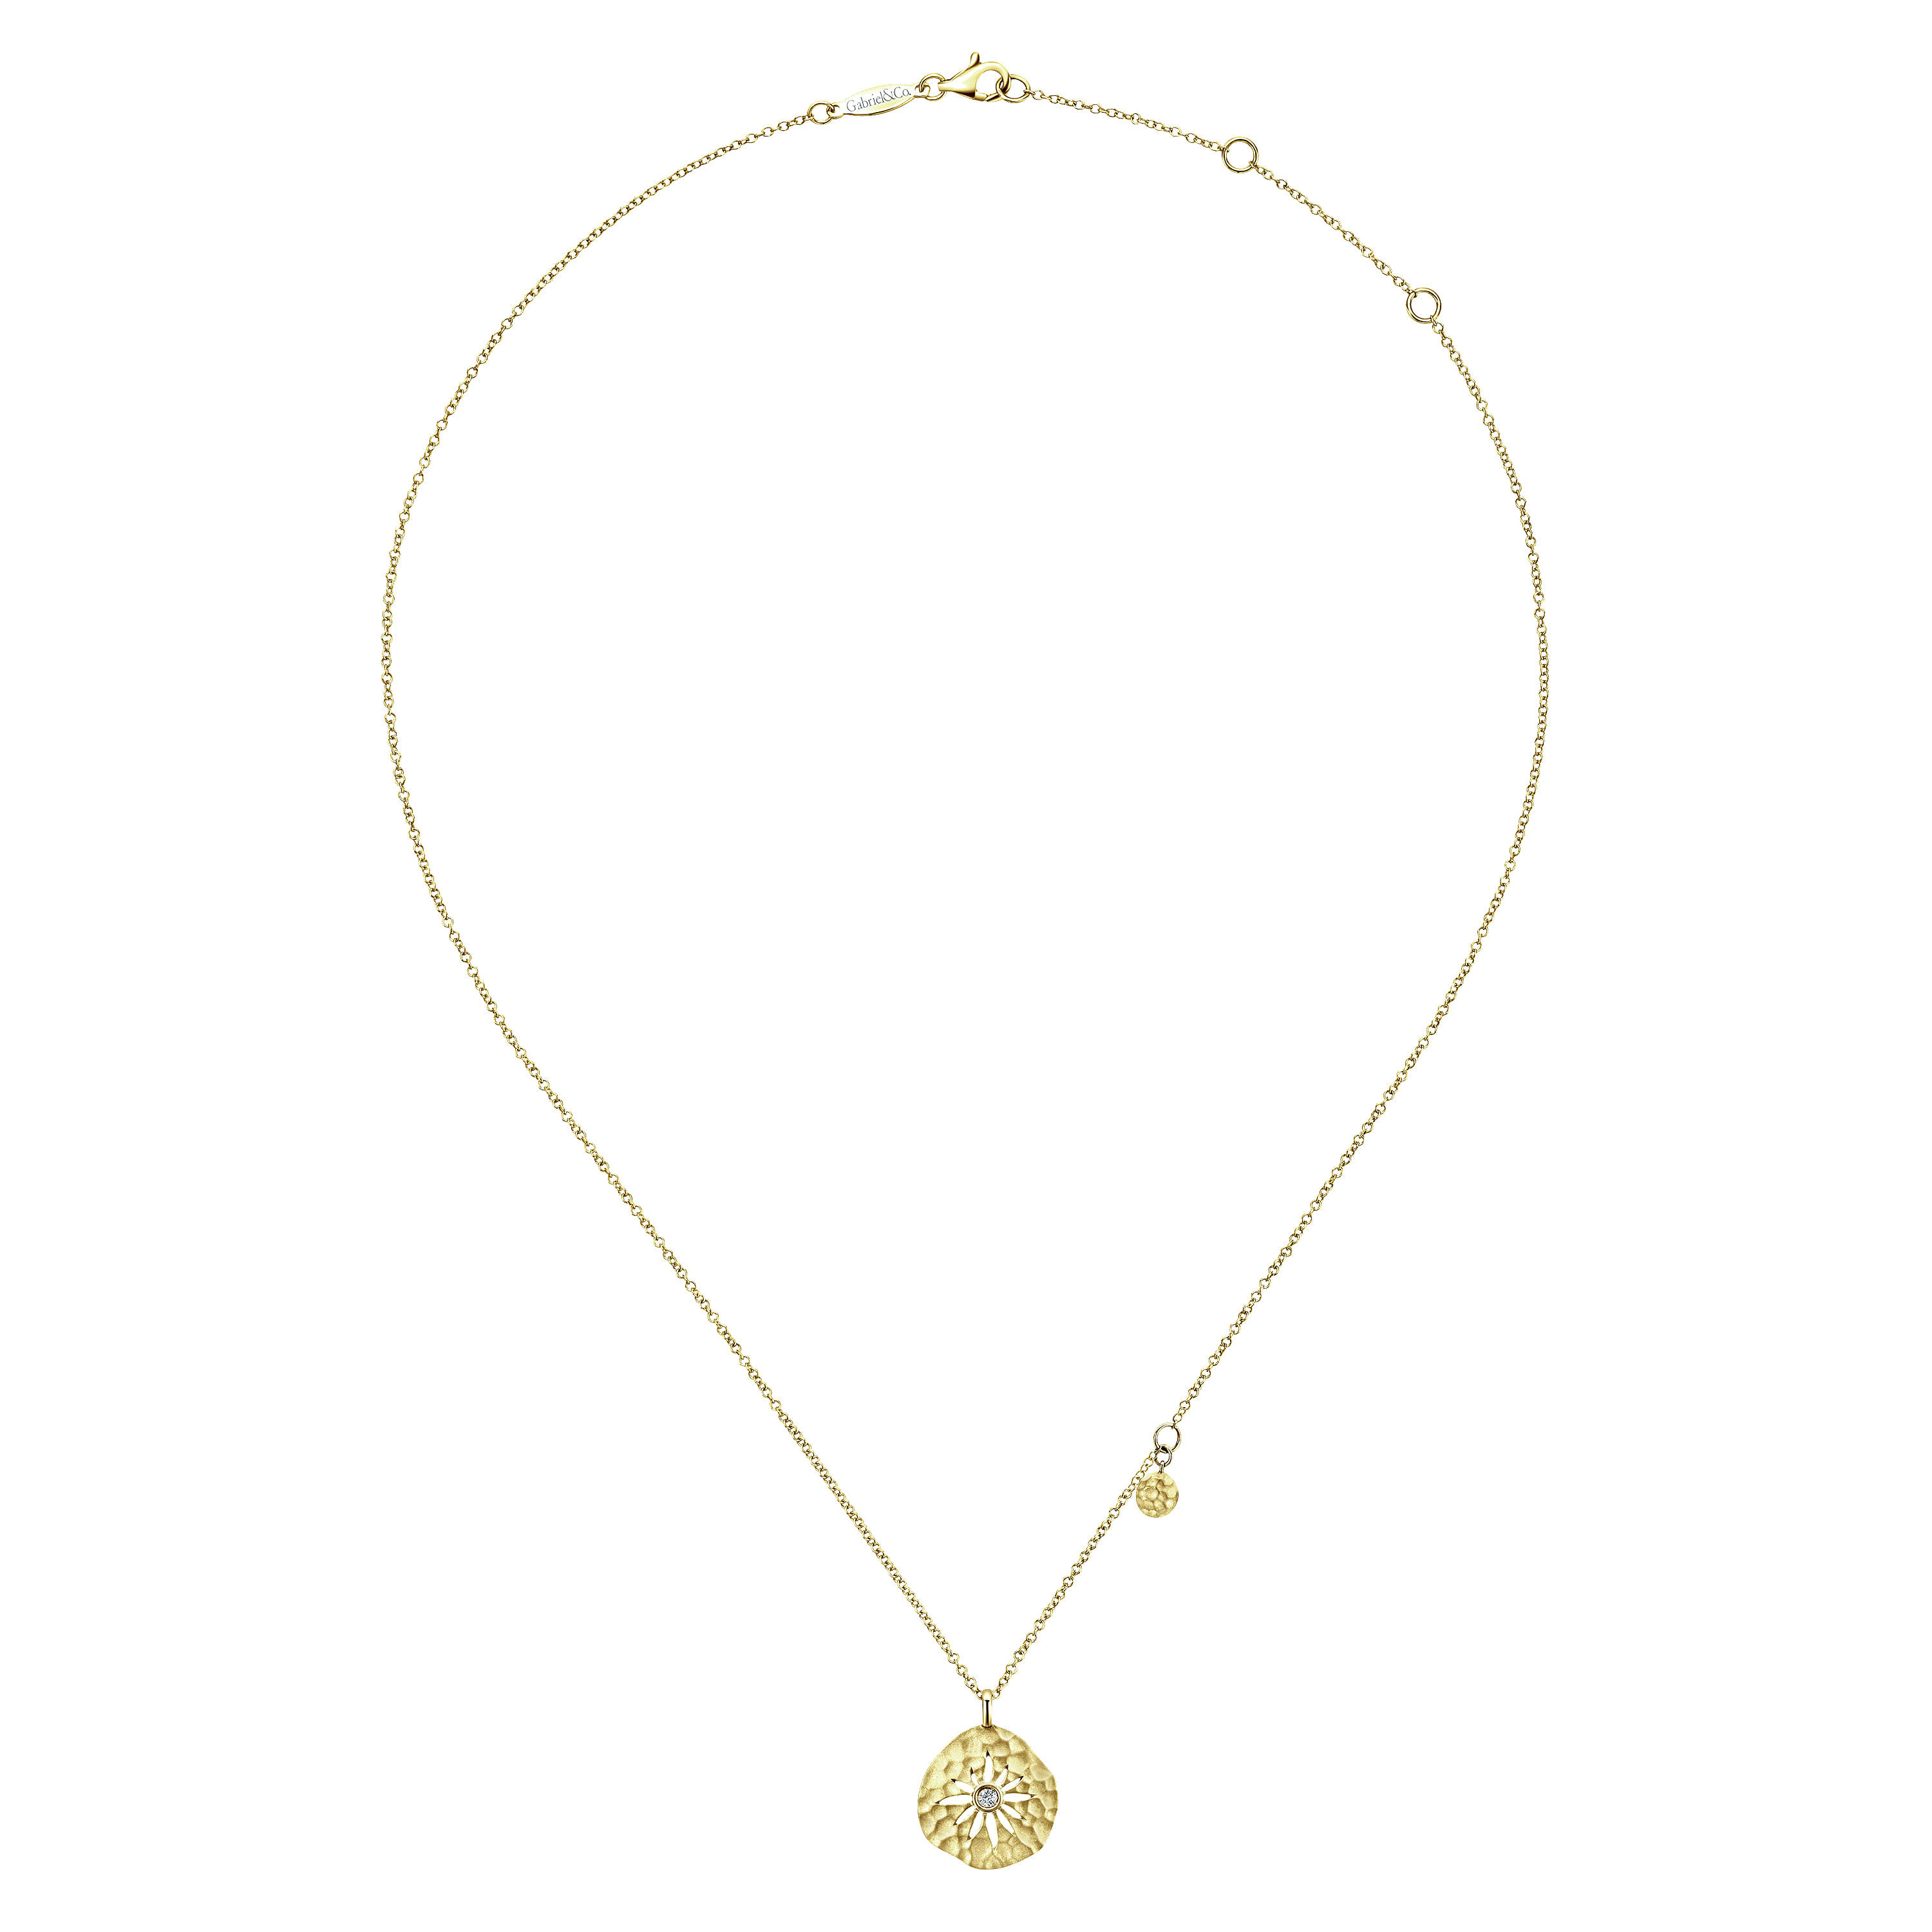 14K Yellow Gold Hammered Pendant Necklace with Diamond and Flower Overlay